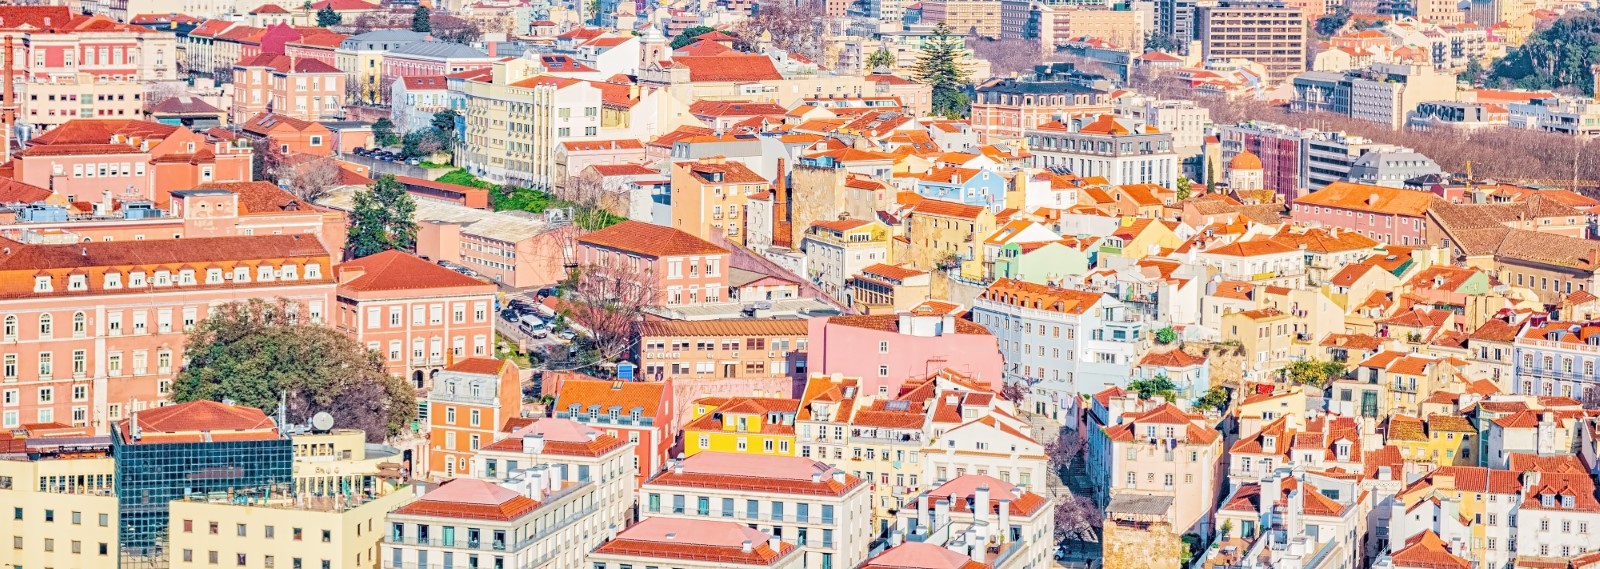 Panoroma of Lisbon and its colourful buildings - some of them renovated thanks to Golden Visa investments.